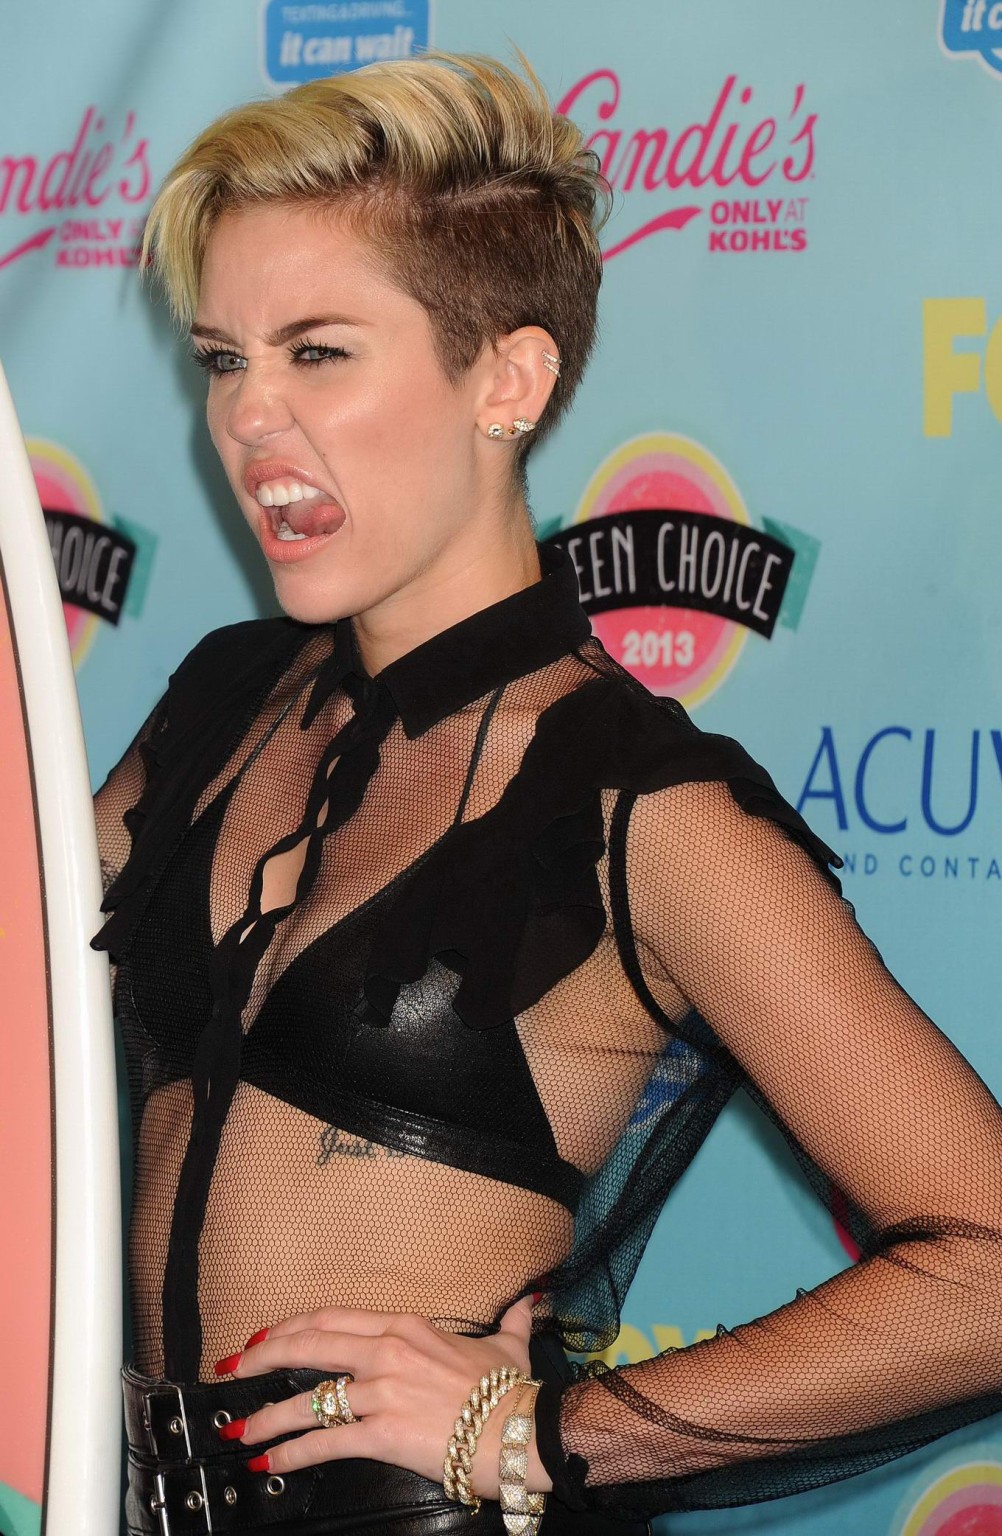 Miley Cyrus wearing black leather bra and mikro skirt at 2013 Teen Choice awards #75221940